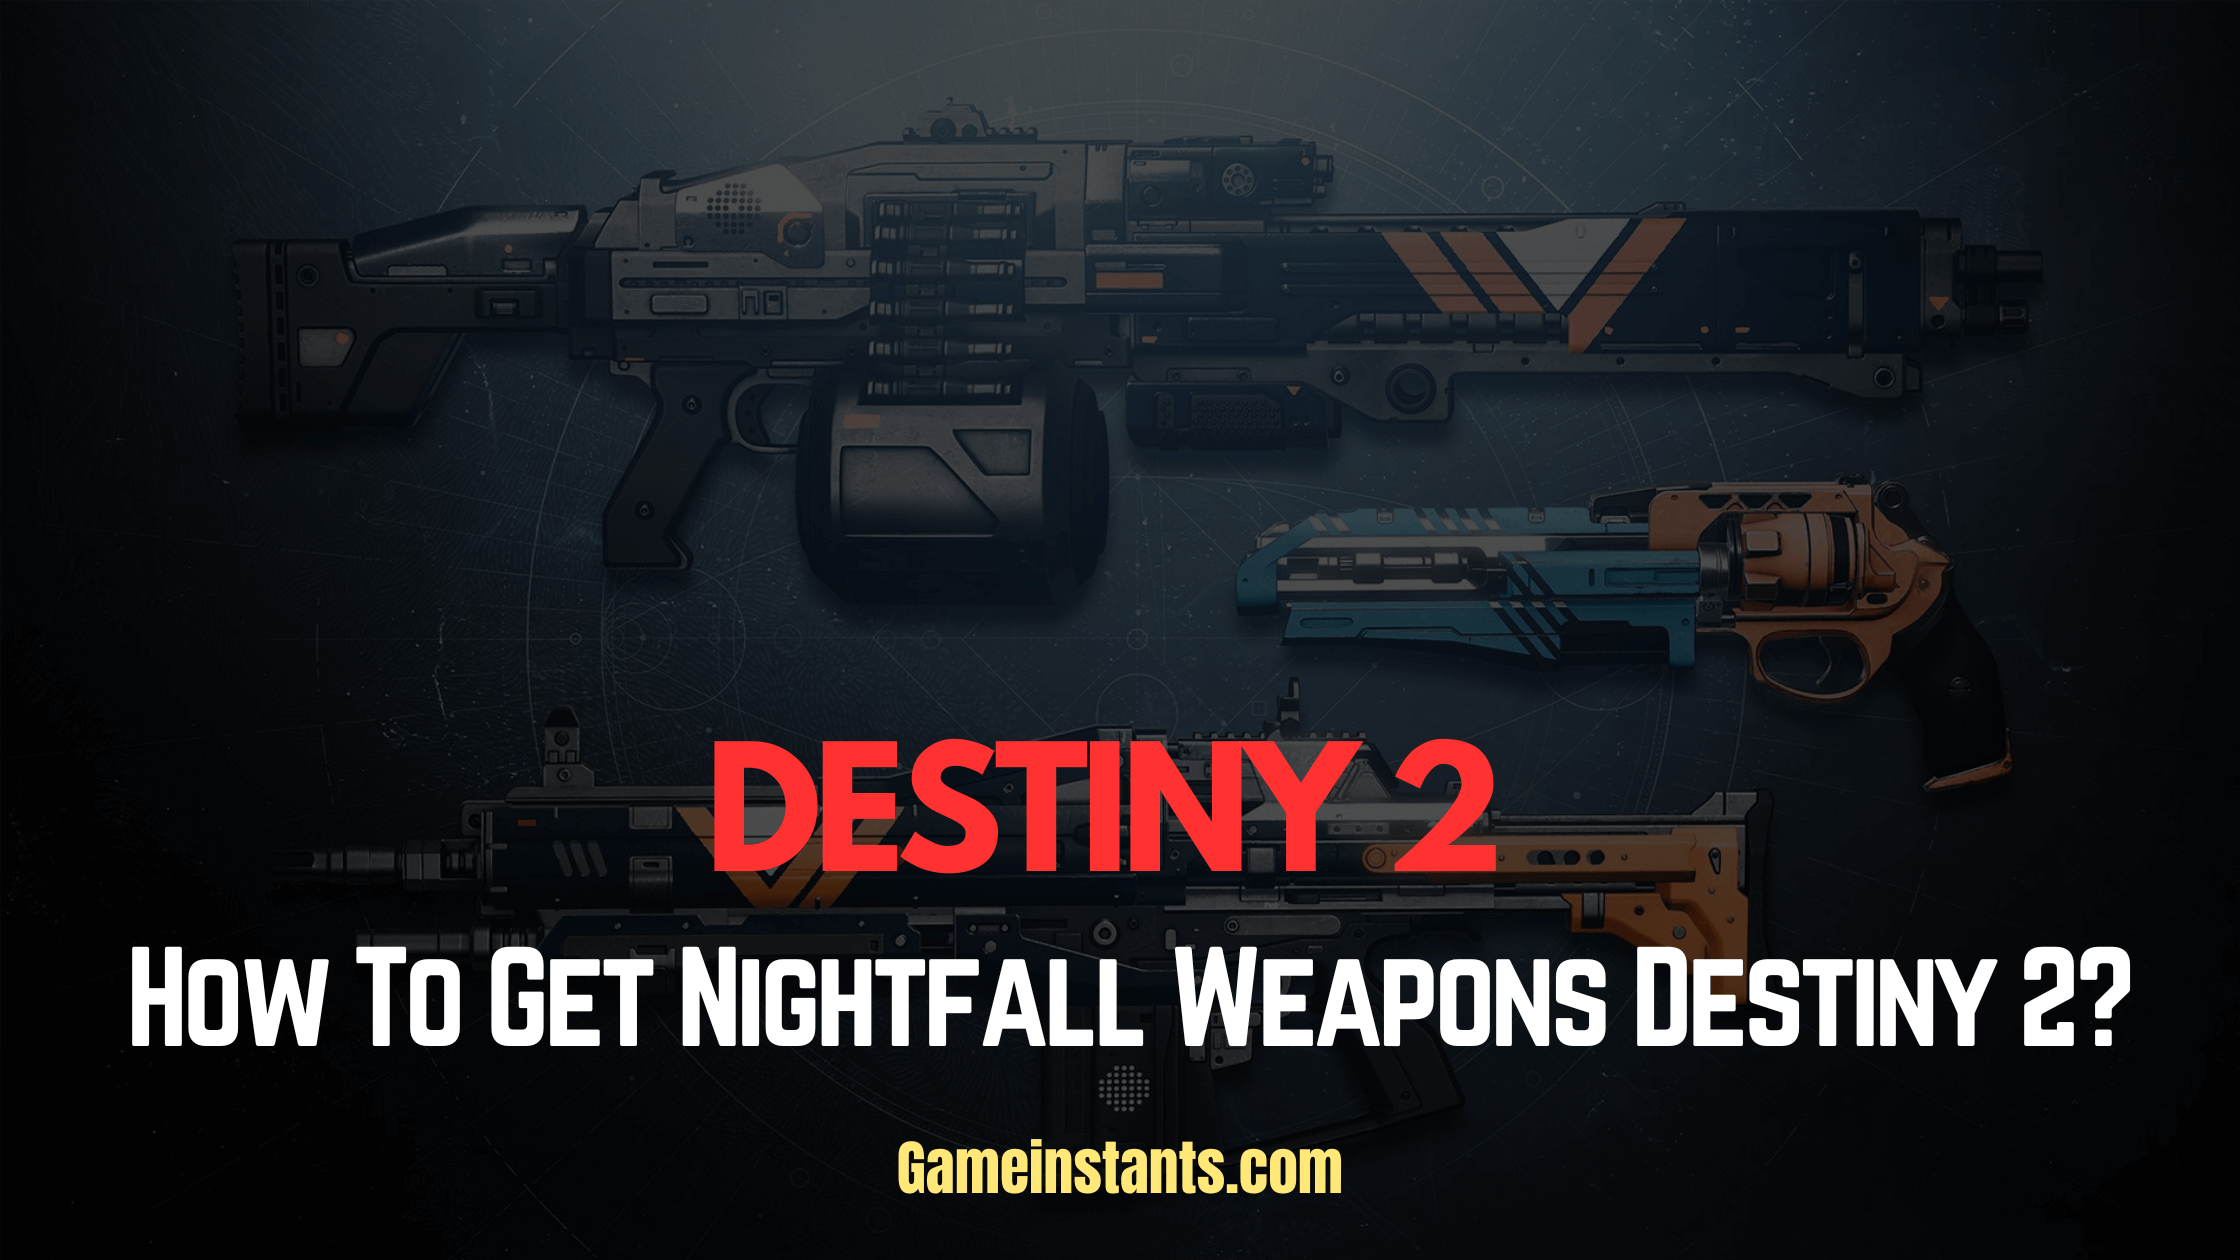 Destiny 2 how to get nightfall weapons